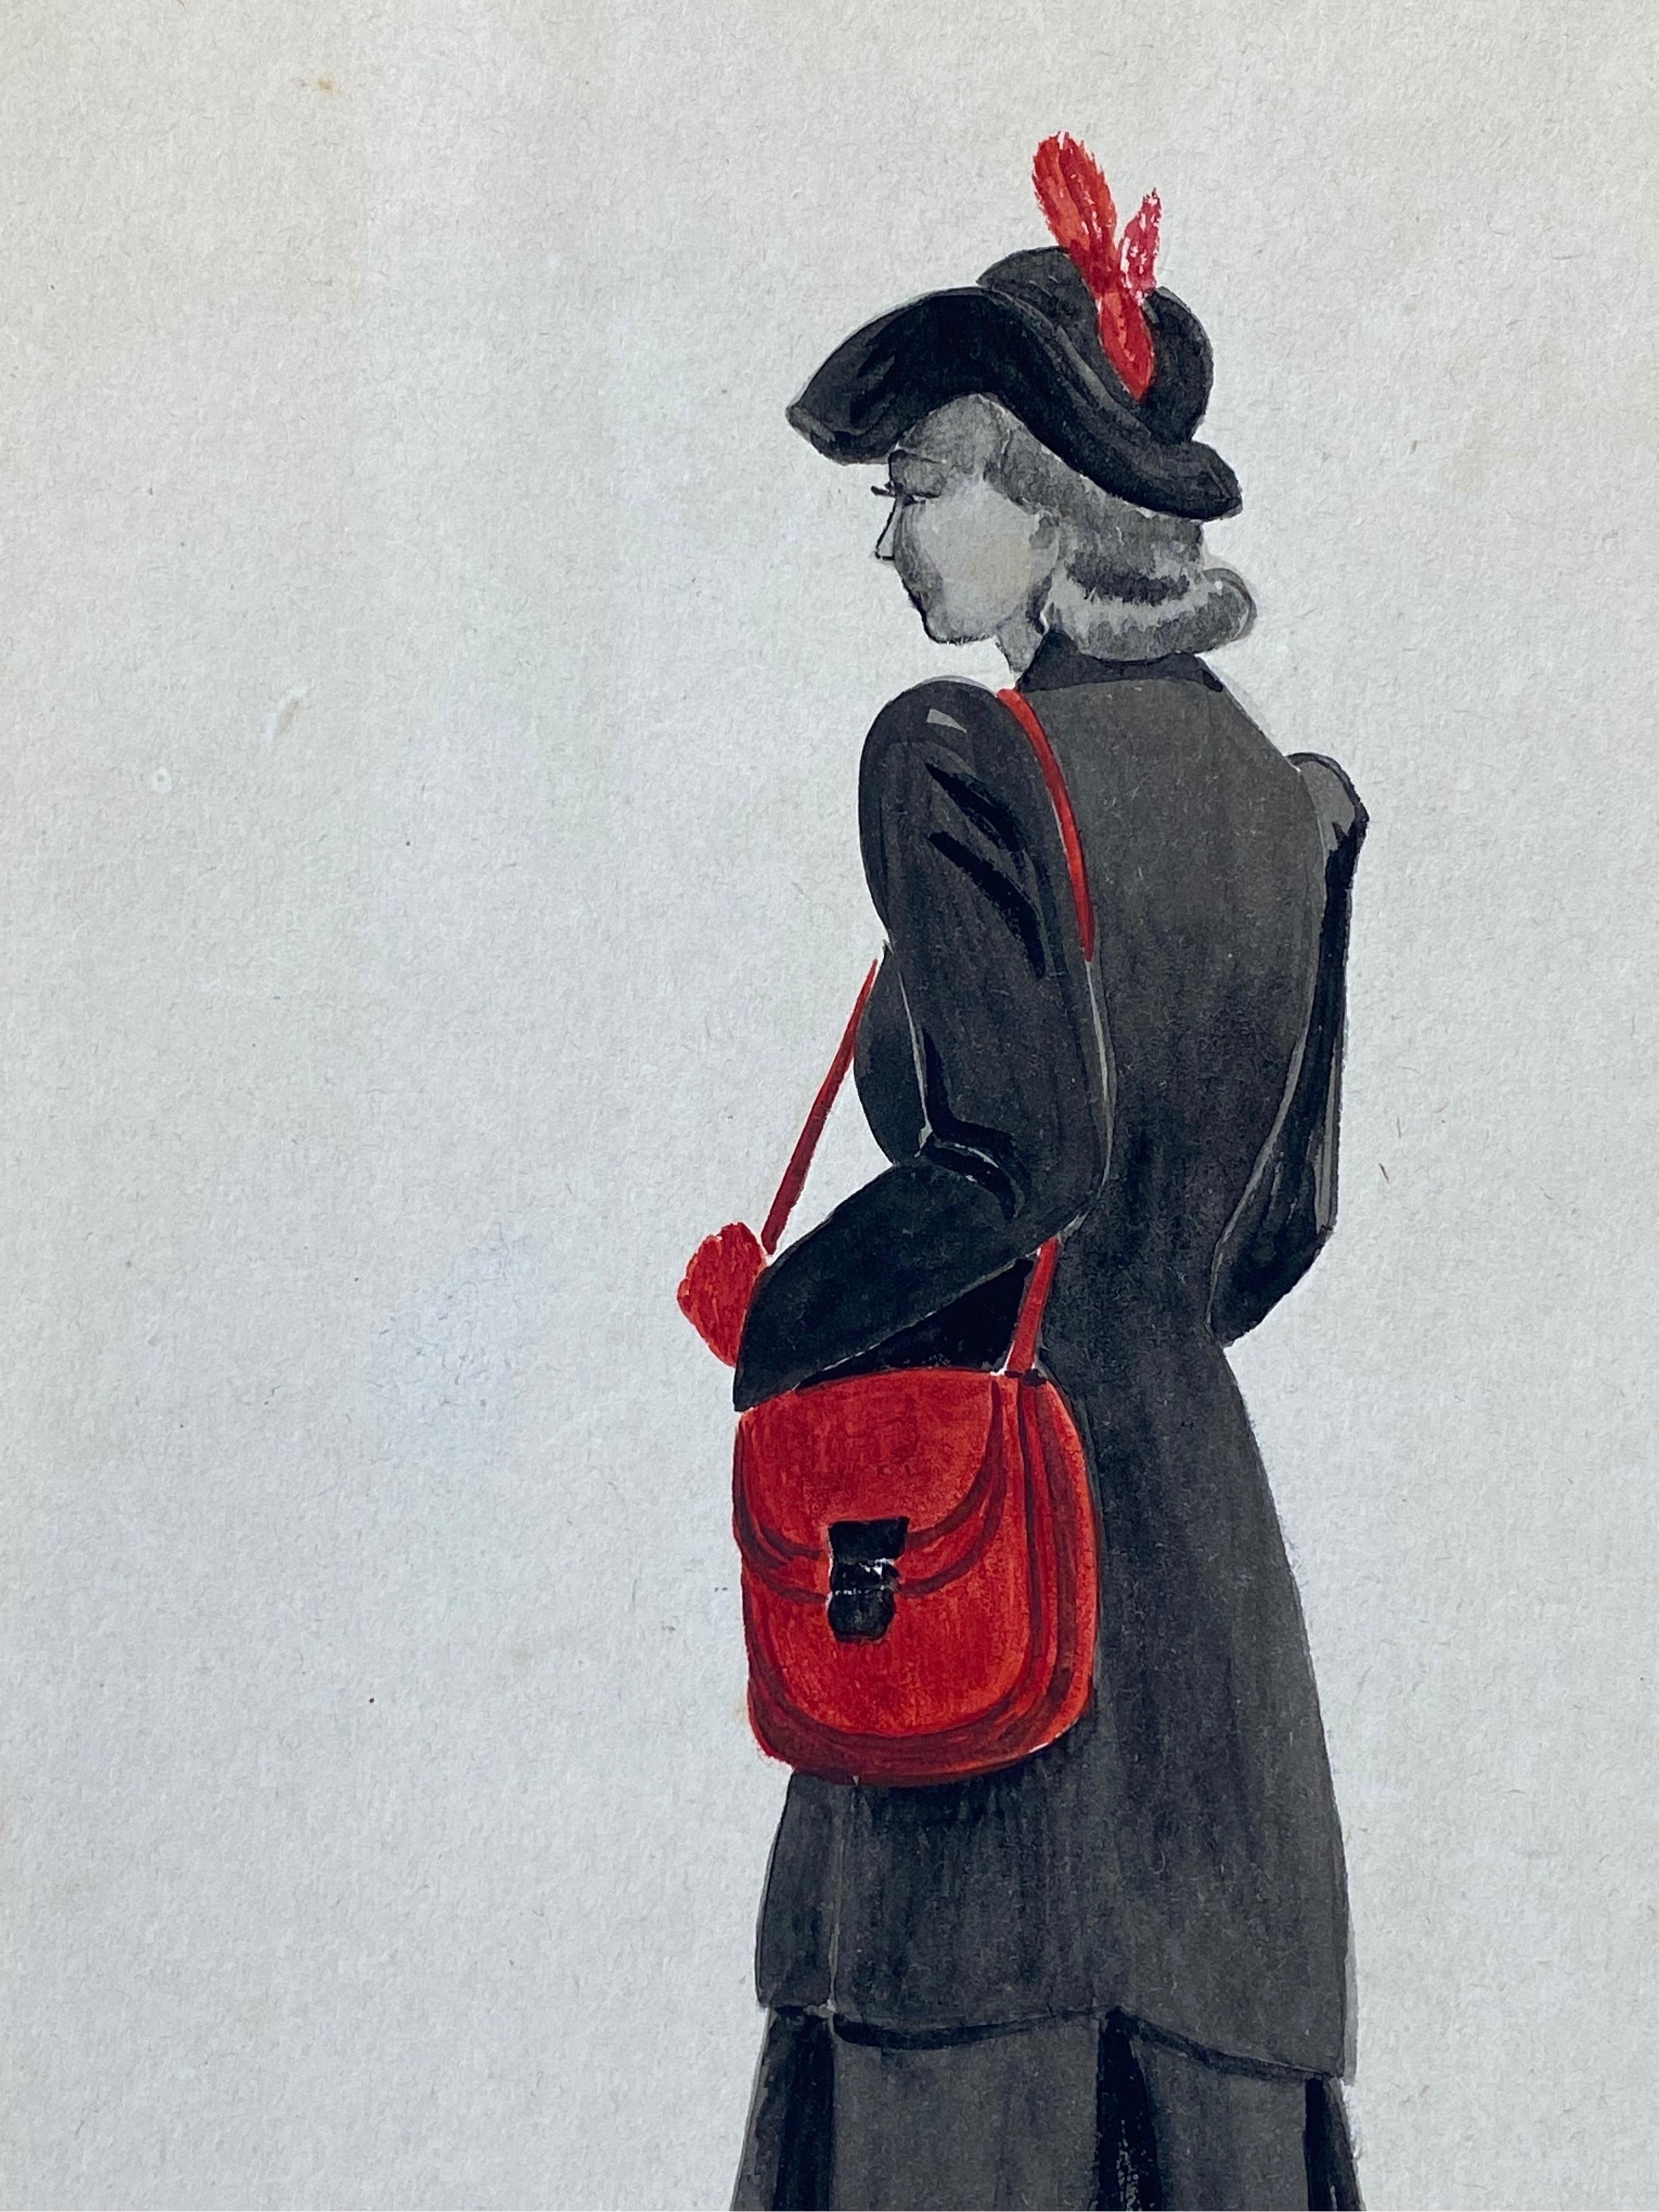 1940's French Fashion Illustration - The Elegant Lady With The Red Features - Impressionist Painting by Geneviève Thomas